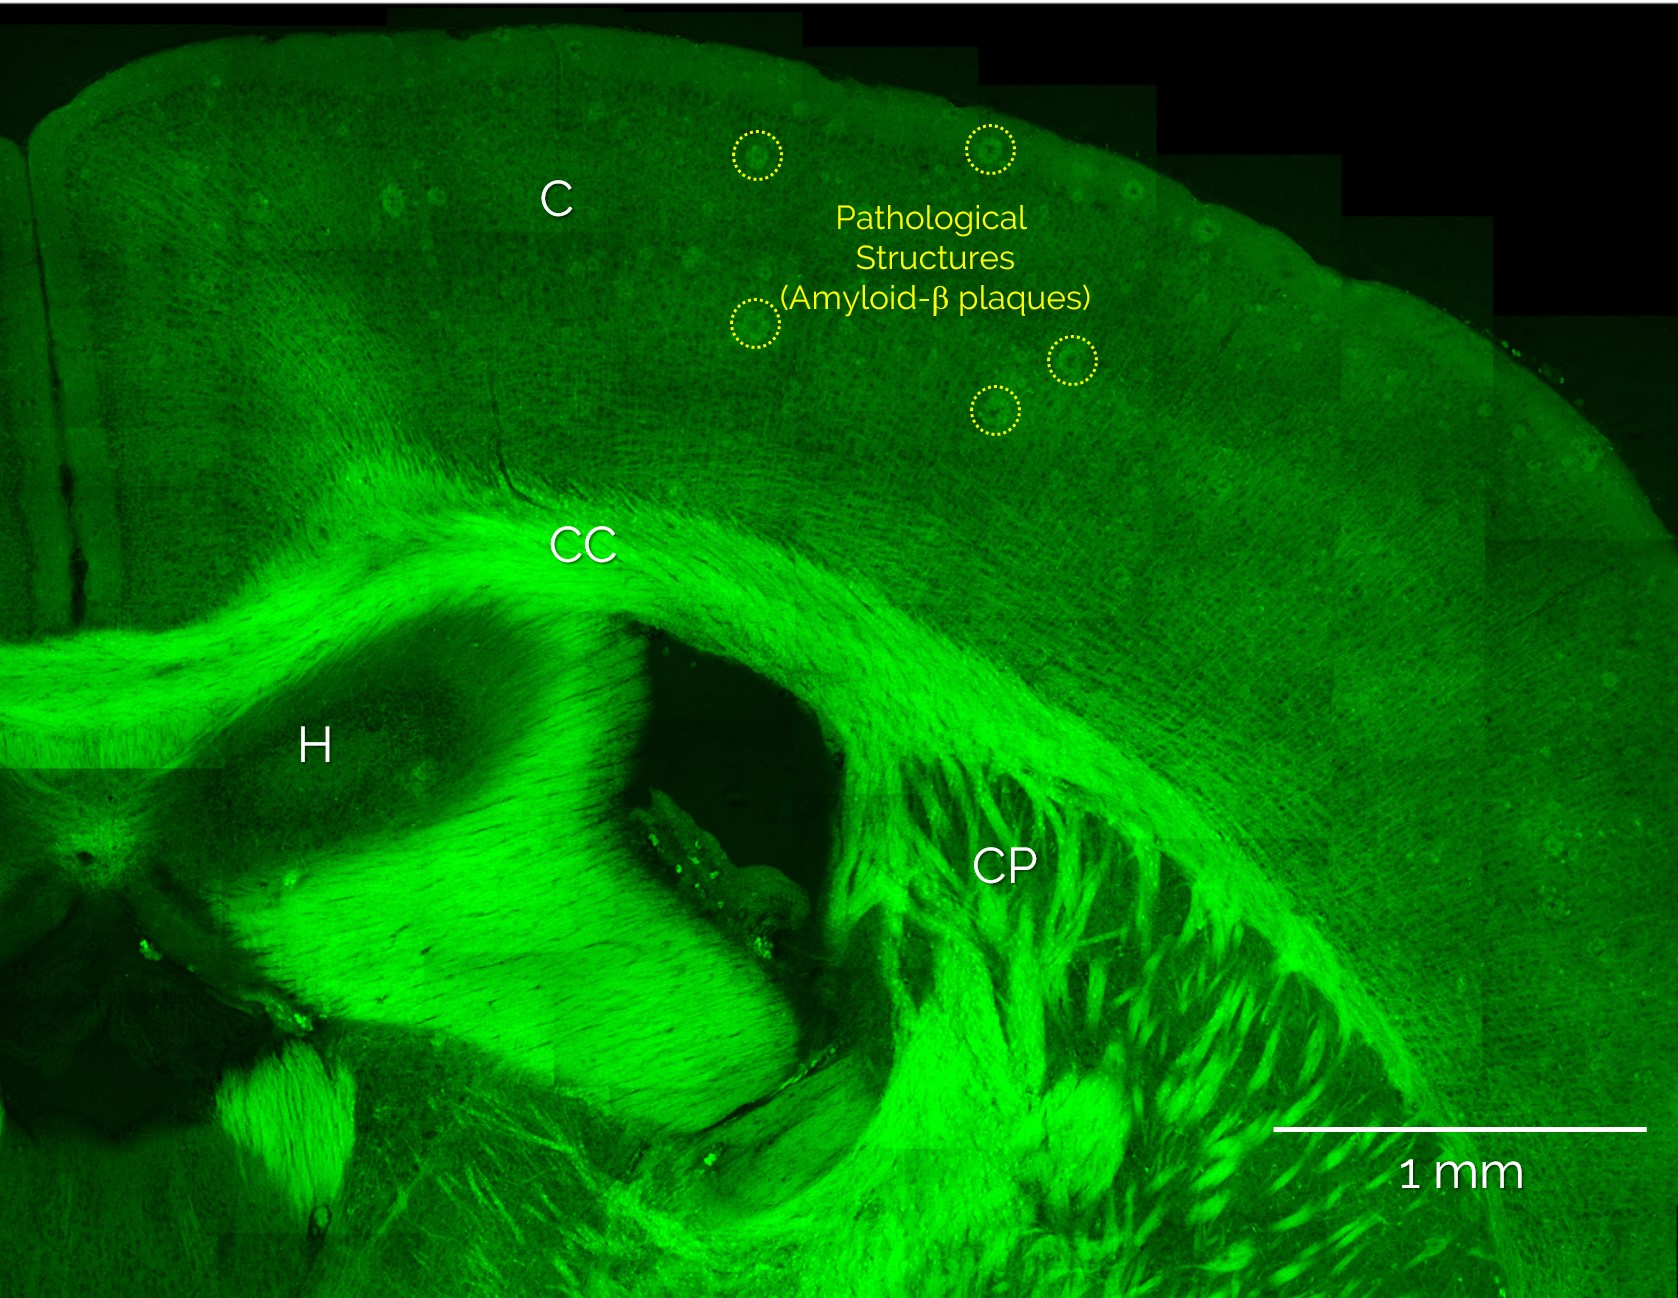 Figure 1: Label-free, large-scale overview image of an unlabeled, diseased mouse brain slice